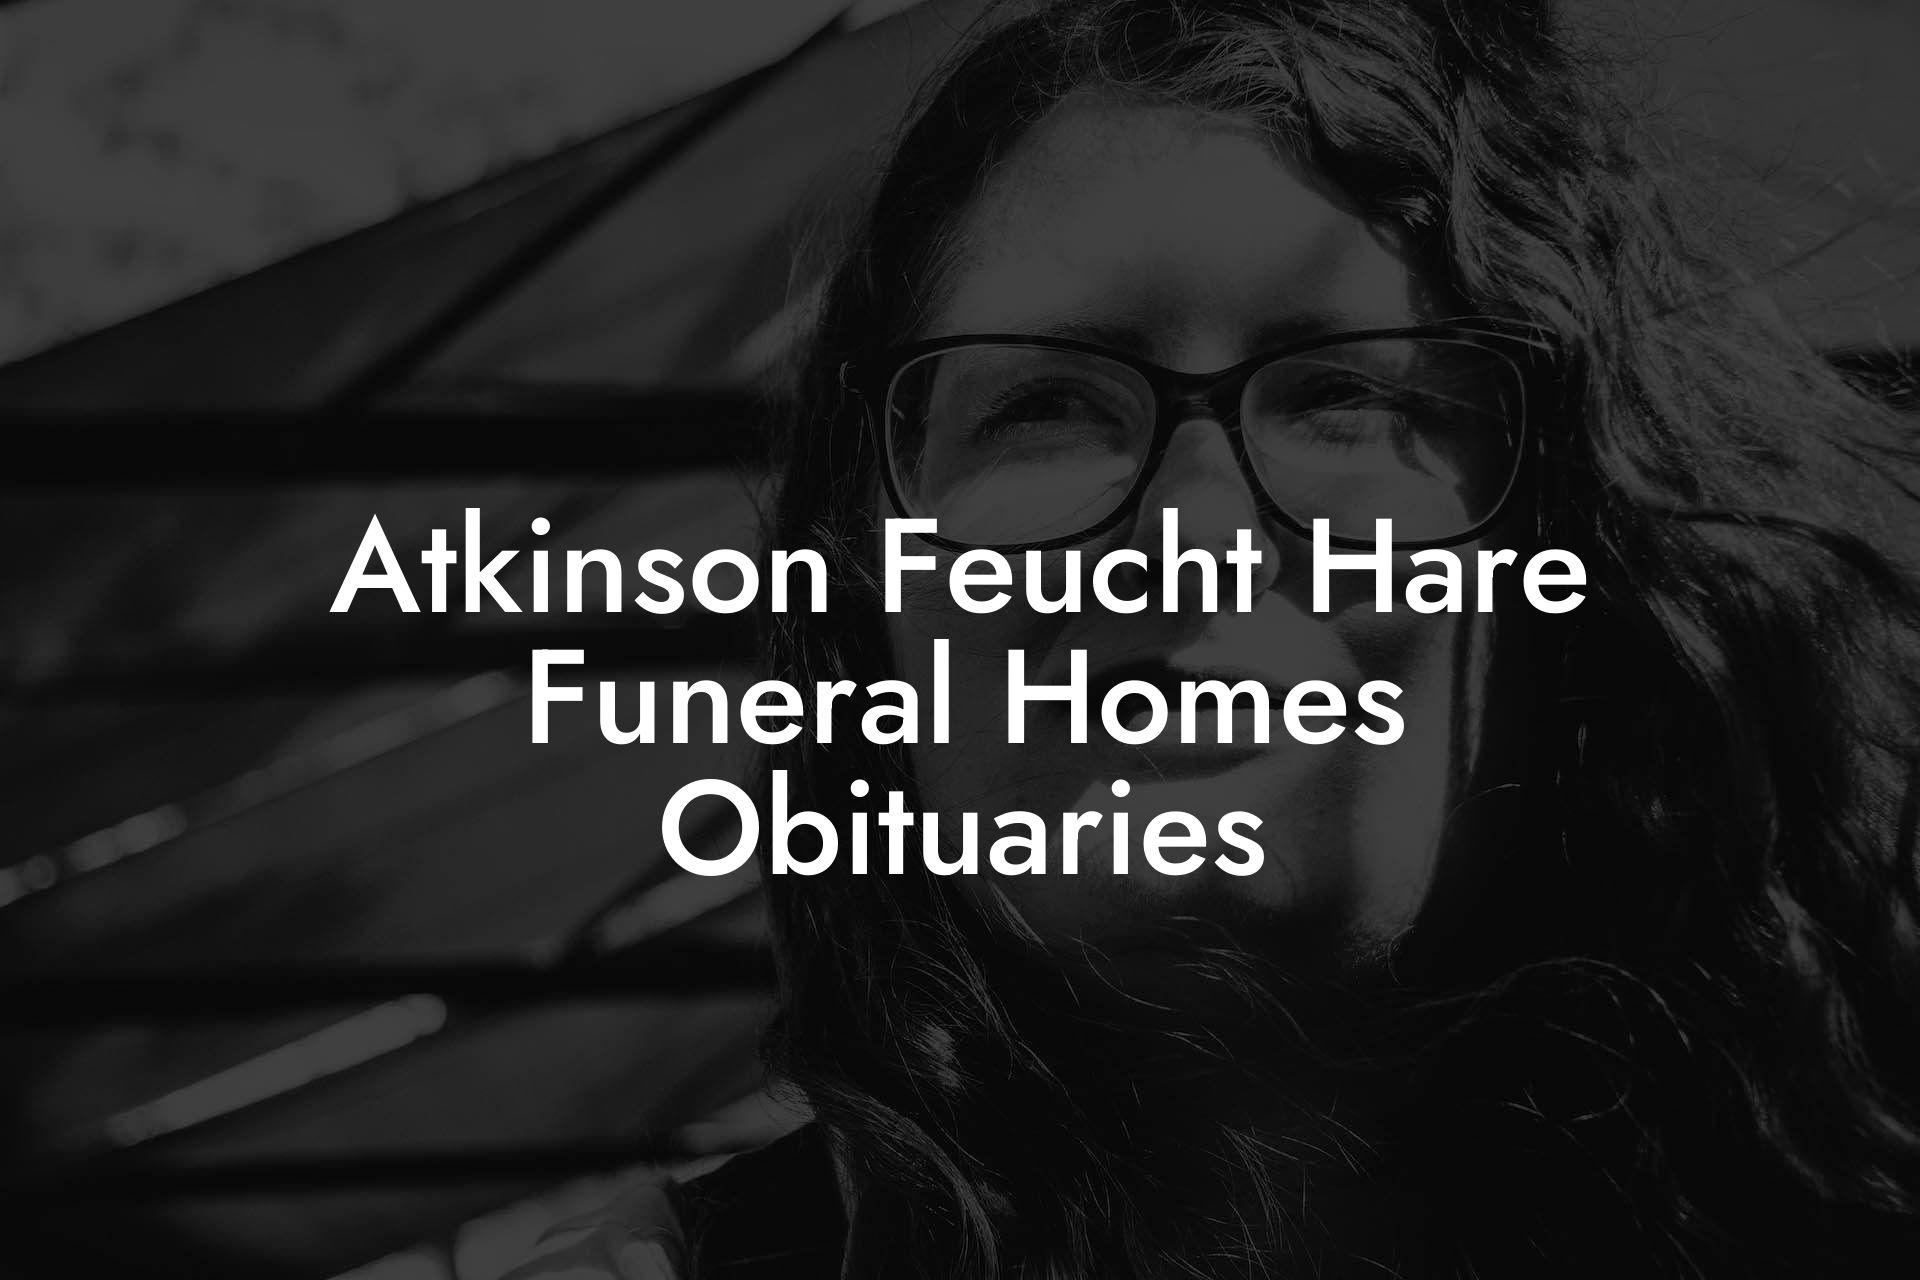 Atkinson Feucht Hare Funeral Homes Obituaries